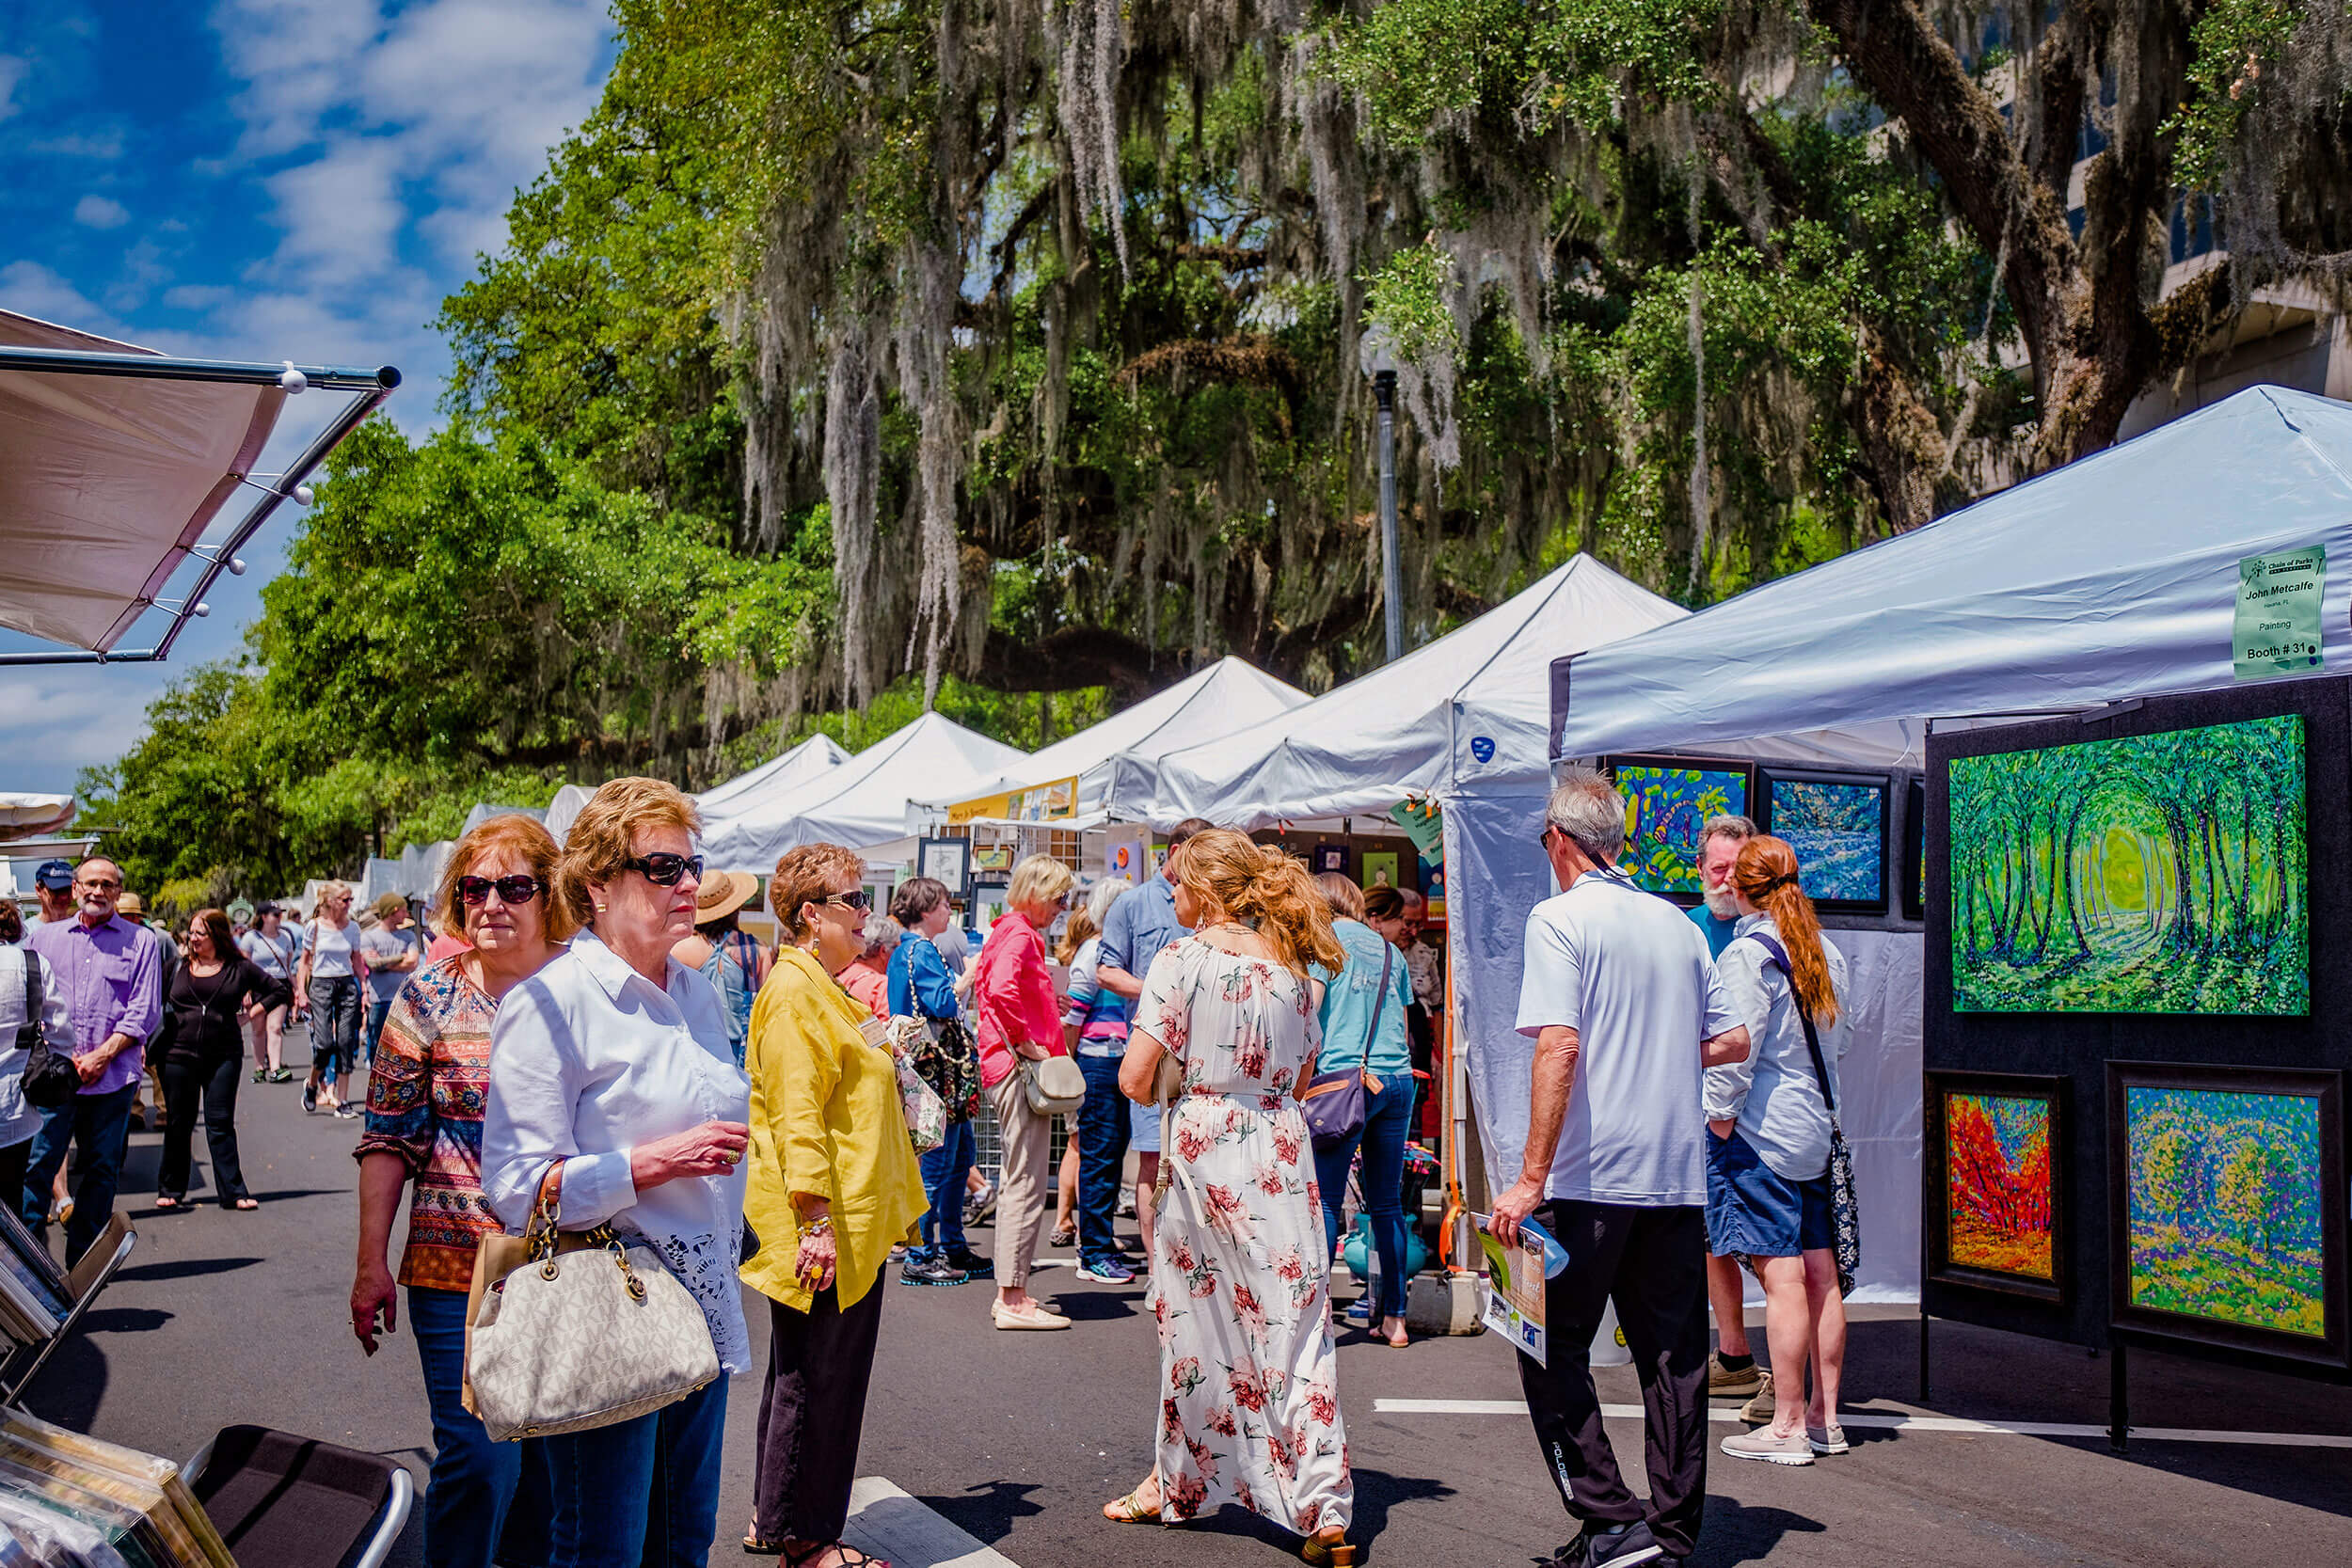 Crowds gather at outdoor art fair.